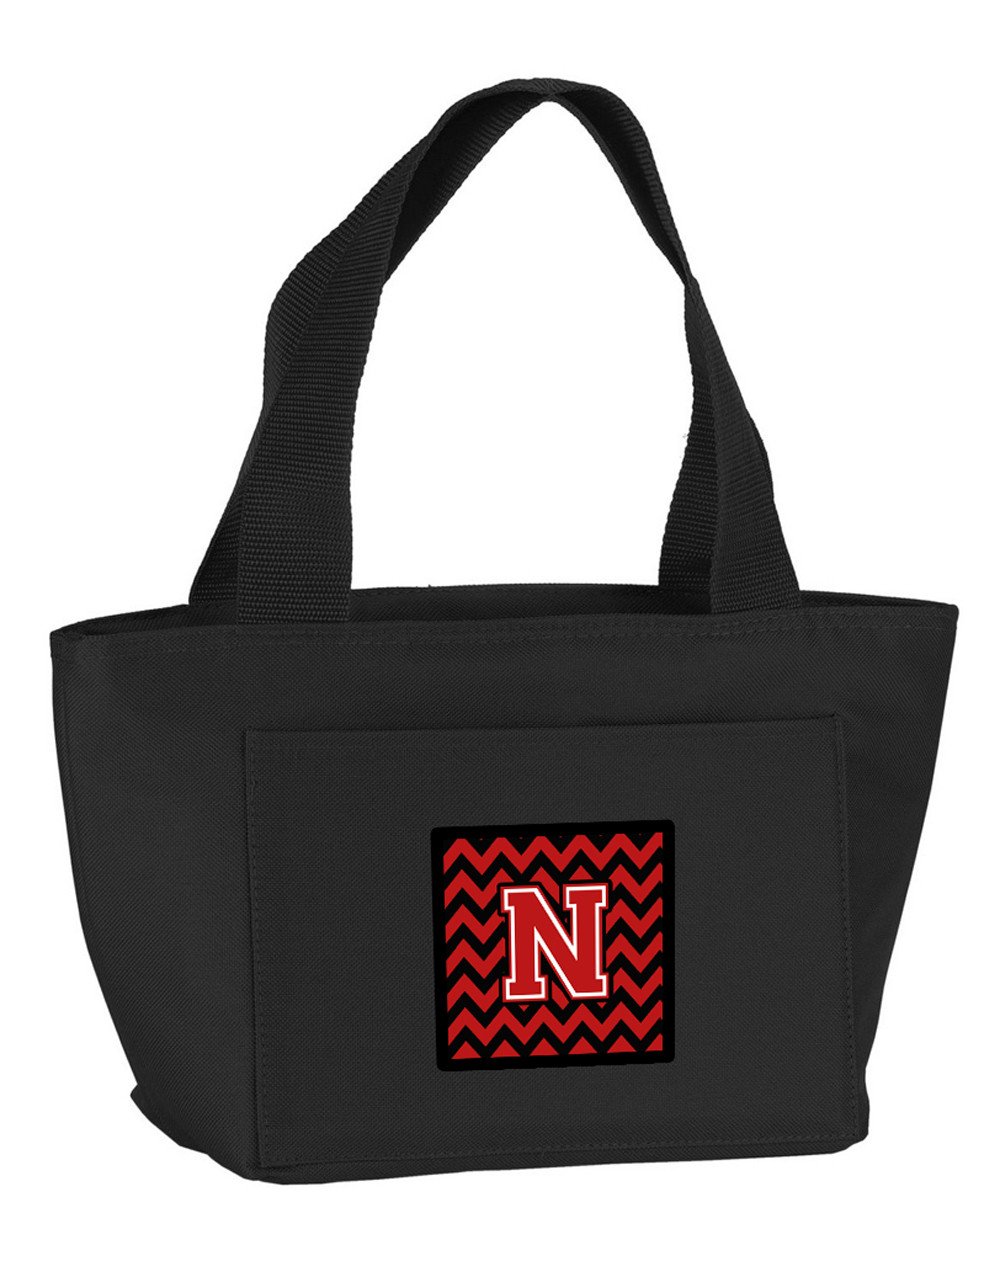 Letter N Chevron Black and Red   Lunch Bag CJ1047-NBK-8808 by Caroline&#39;s Treasures